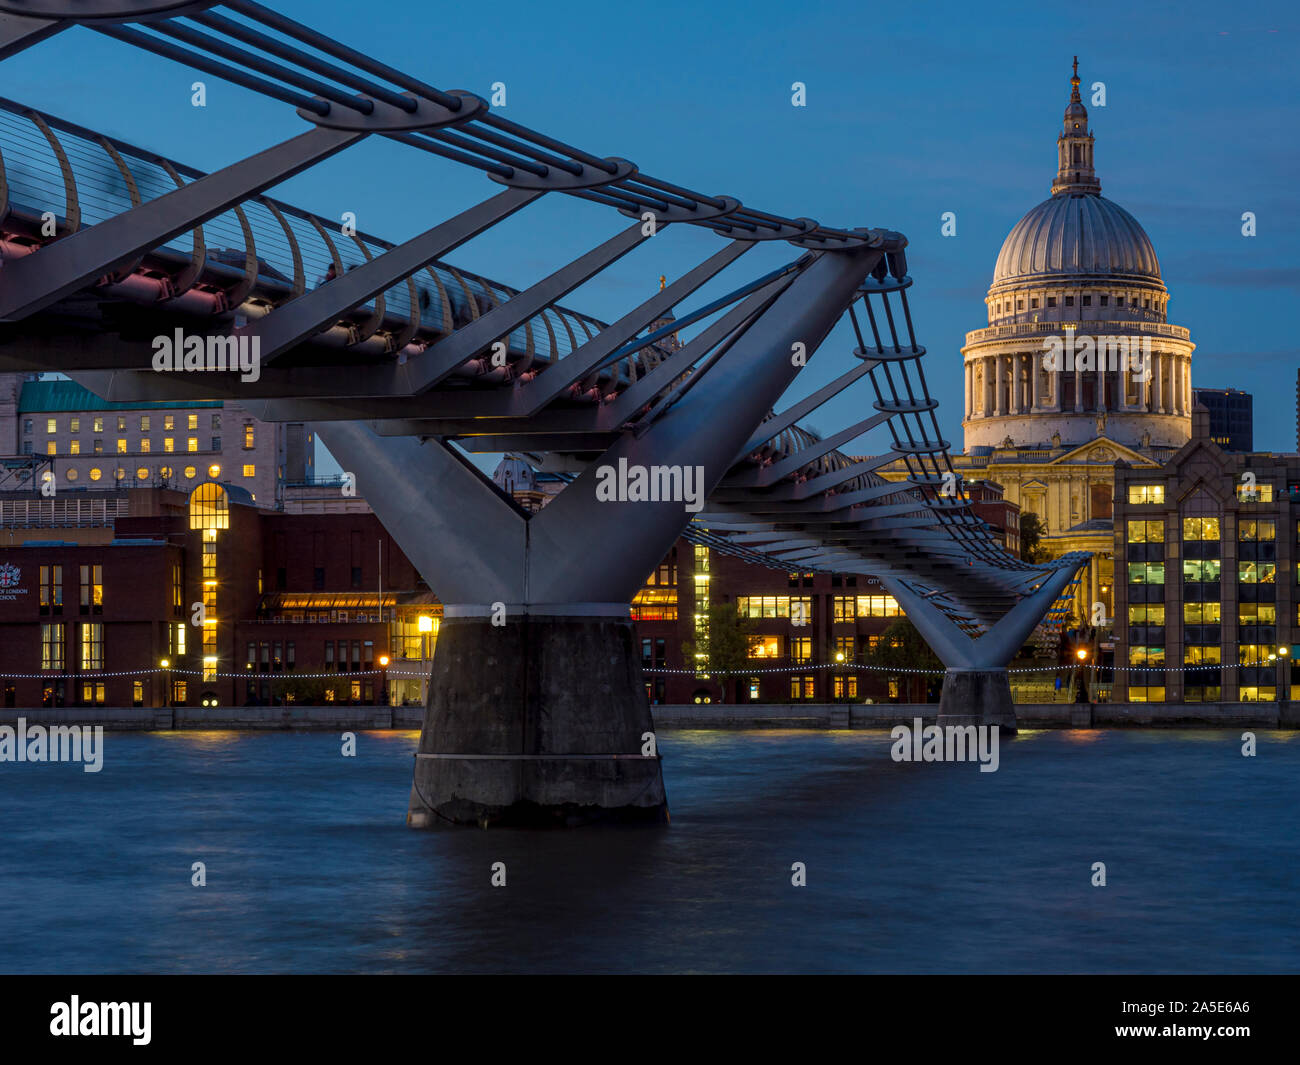 St Paul's Cathedral and Millennium Bridge over River Thames at dusk, London, UK. Stock Photo